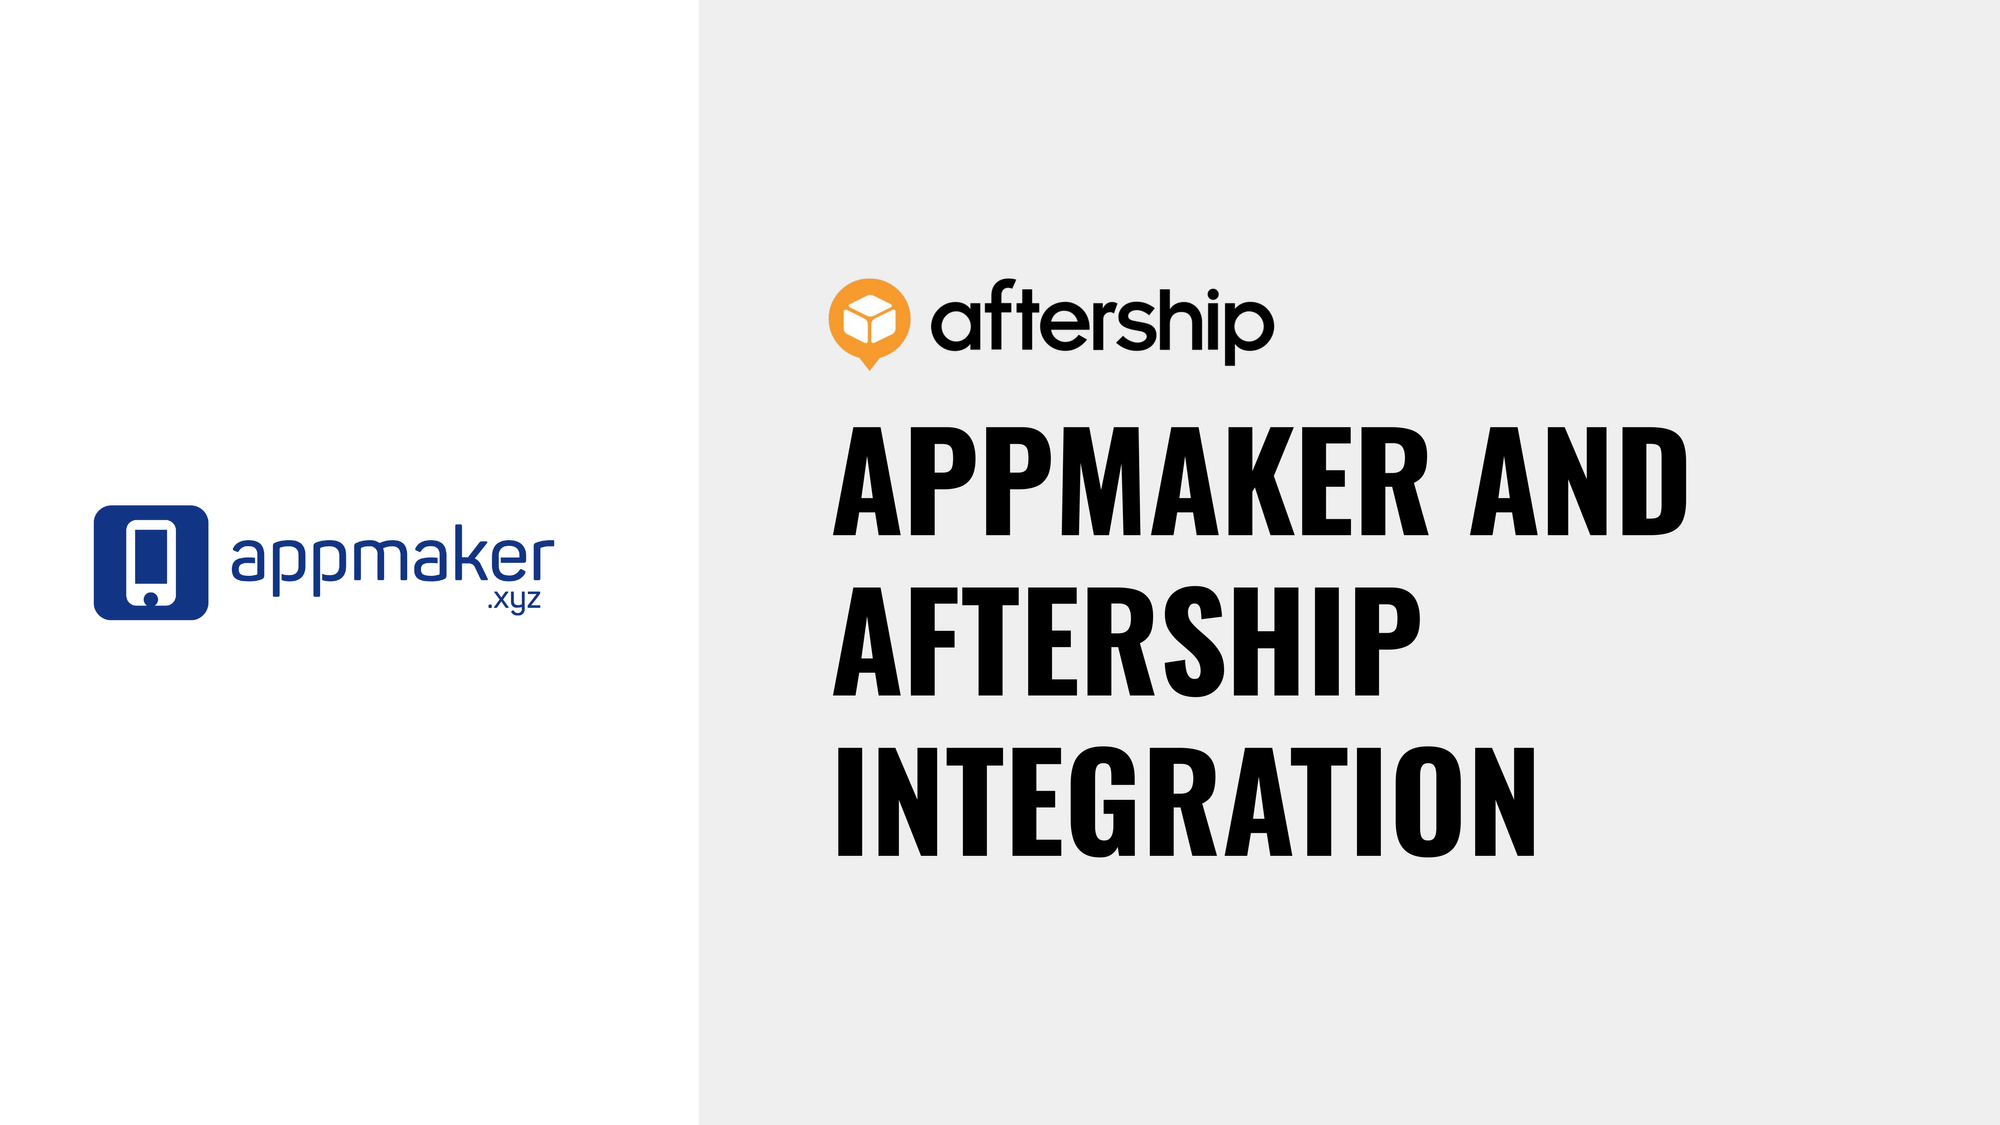 Announcing AfterShip's integration with Appmaker